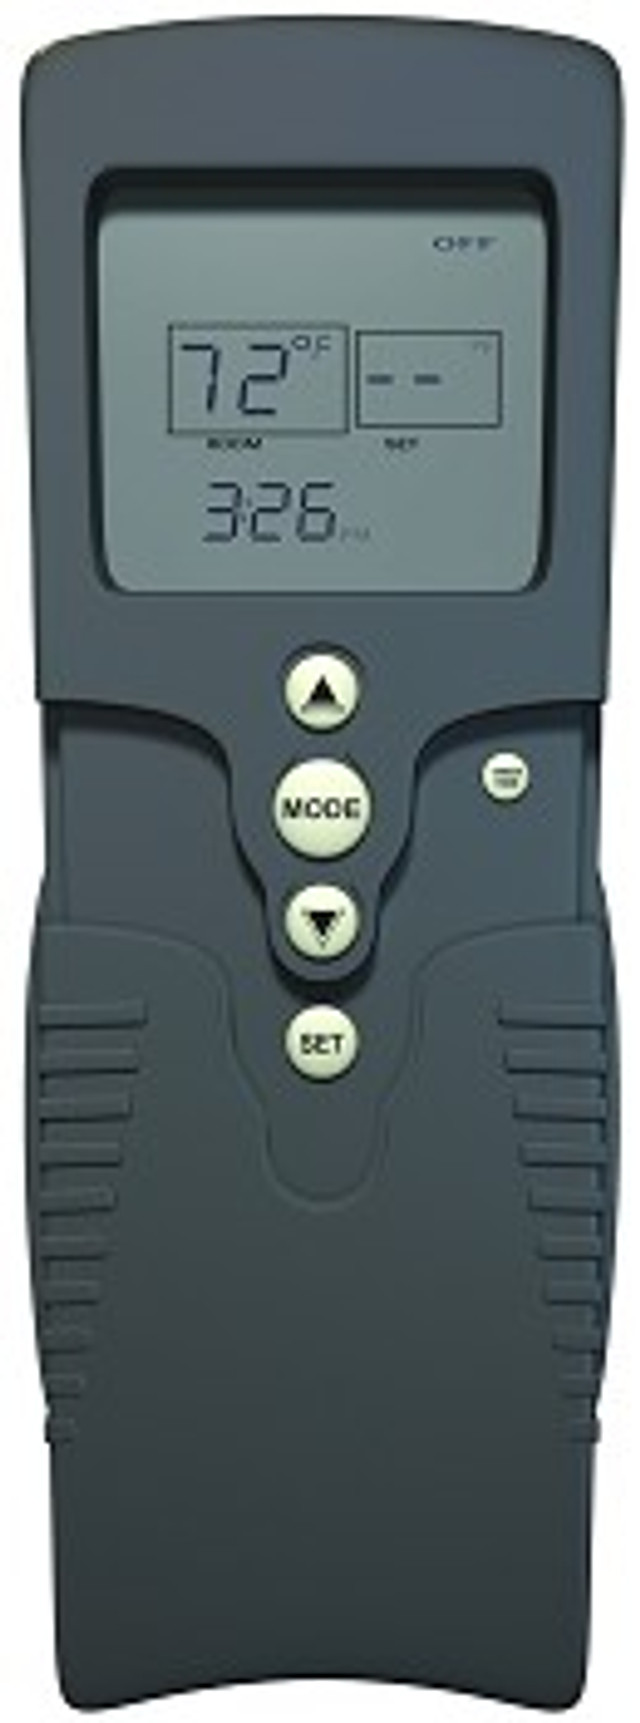 Skytech 3002 Battery Operated Remote Control Thermostat